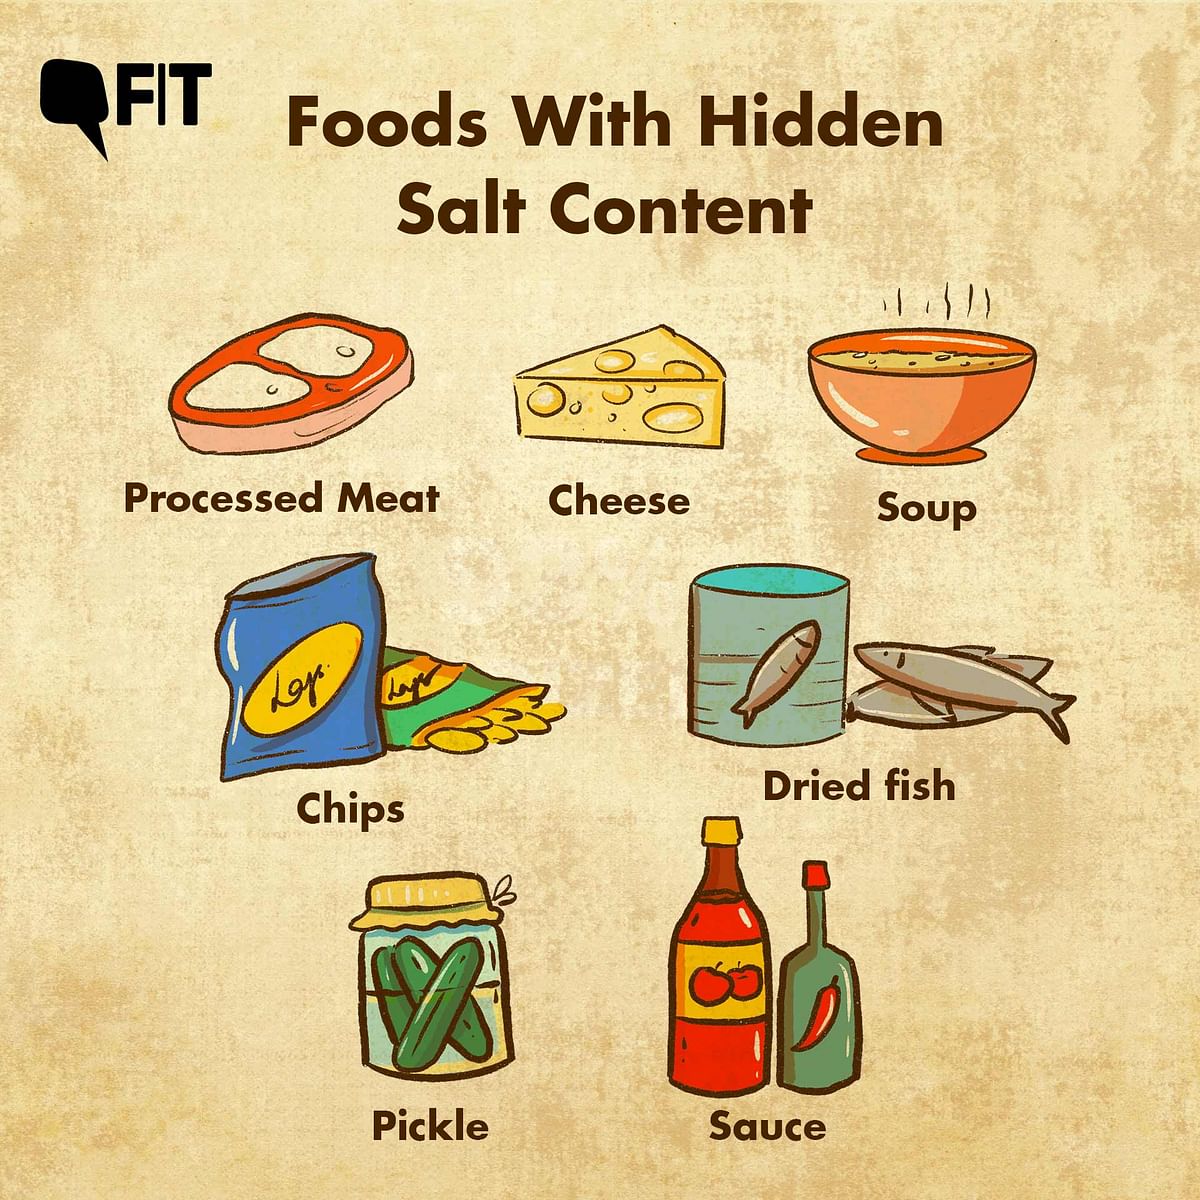 In part 1 and 2 of this series we spoke about the history and uses of salt. It's time to talk about the problems.